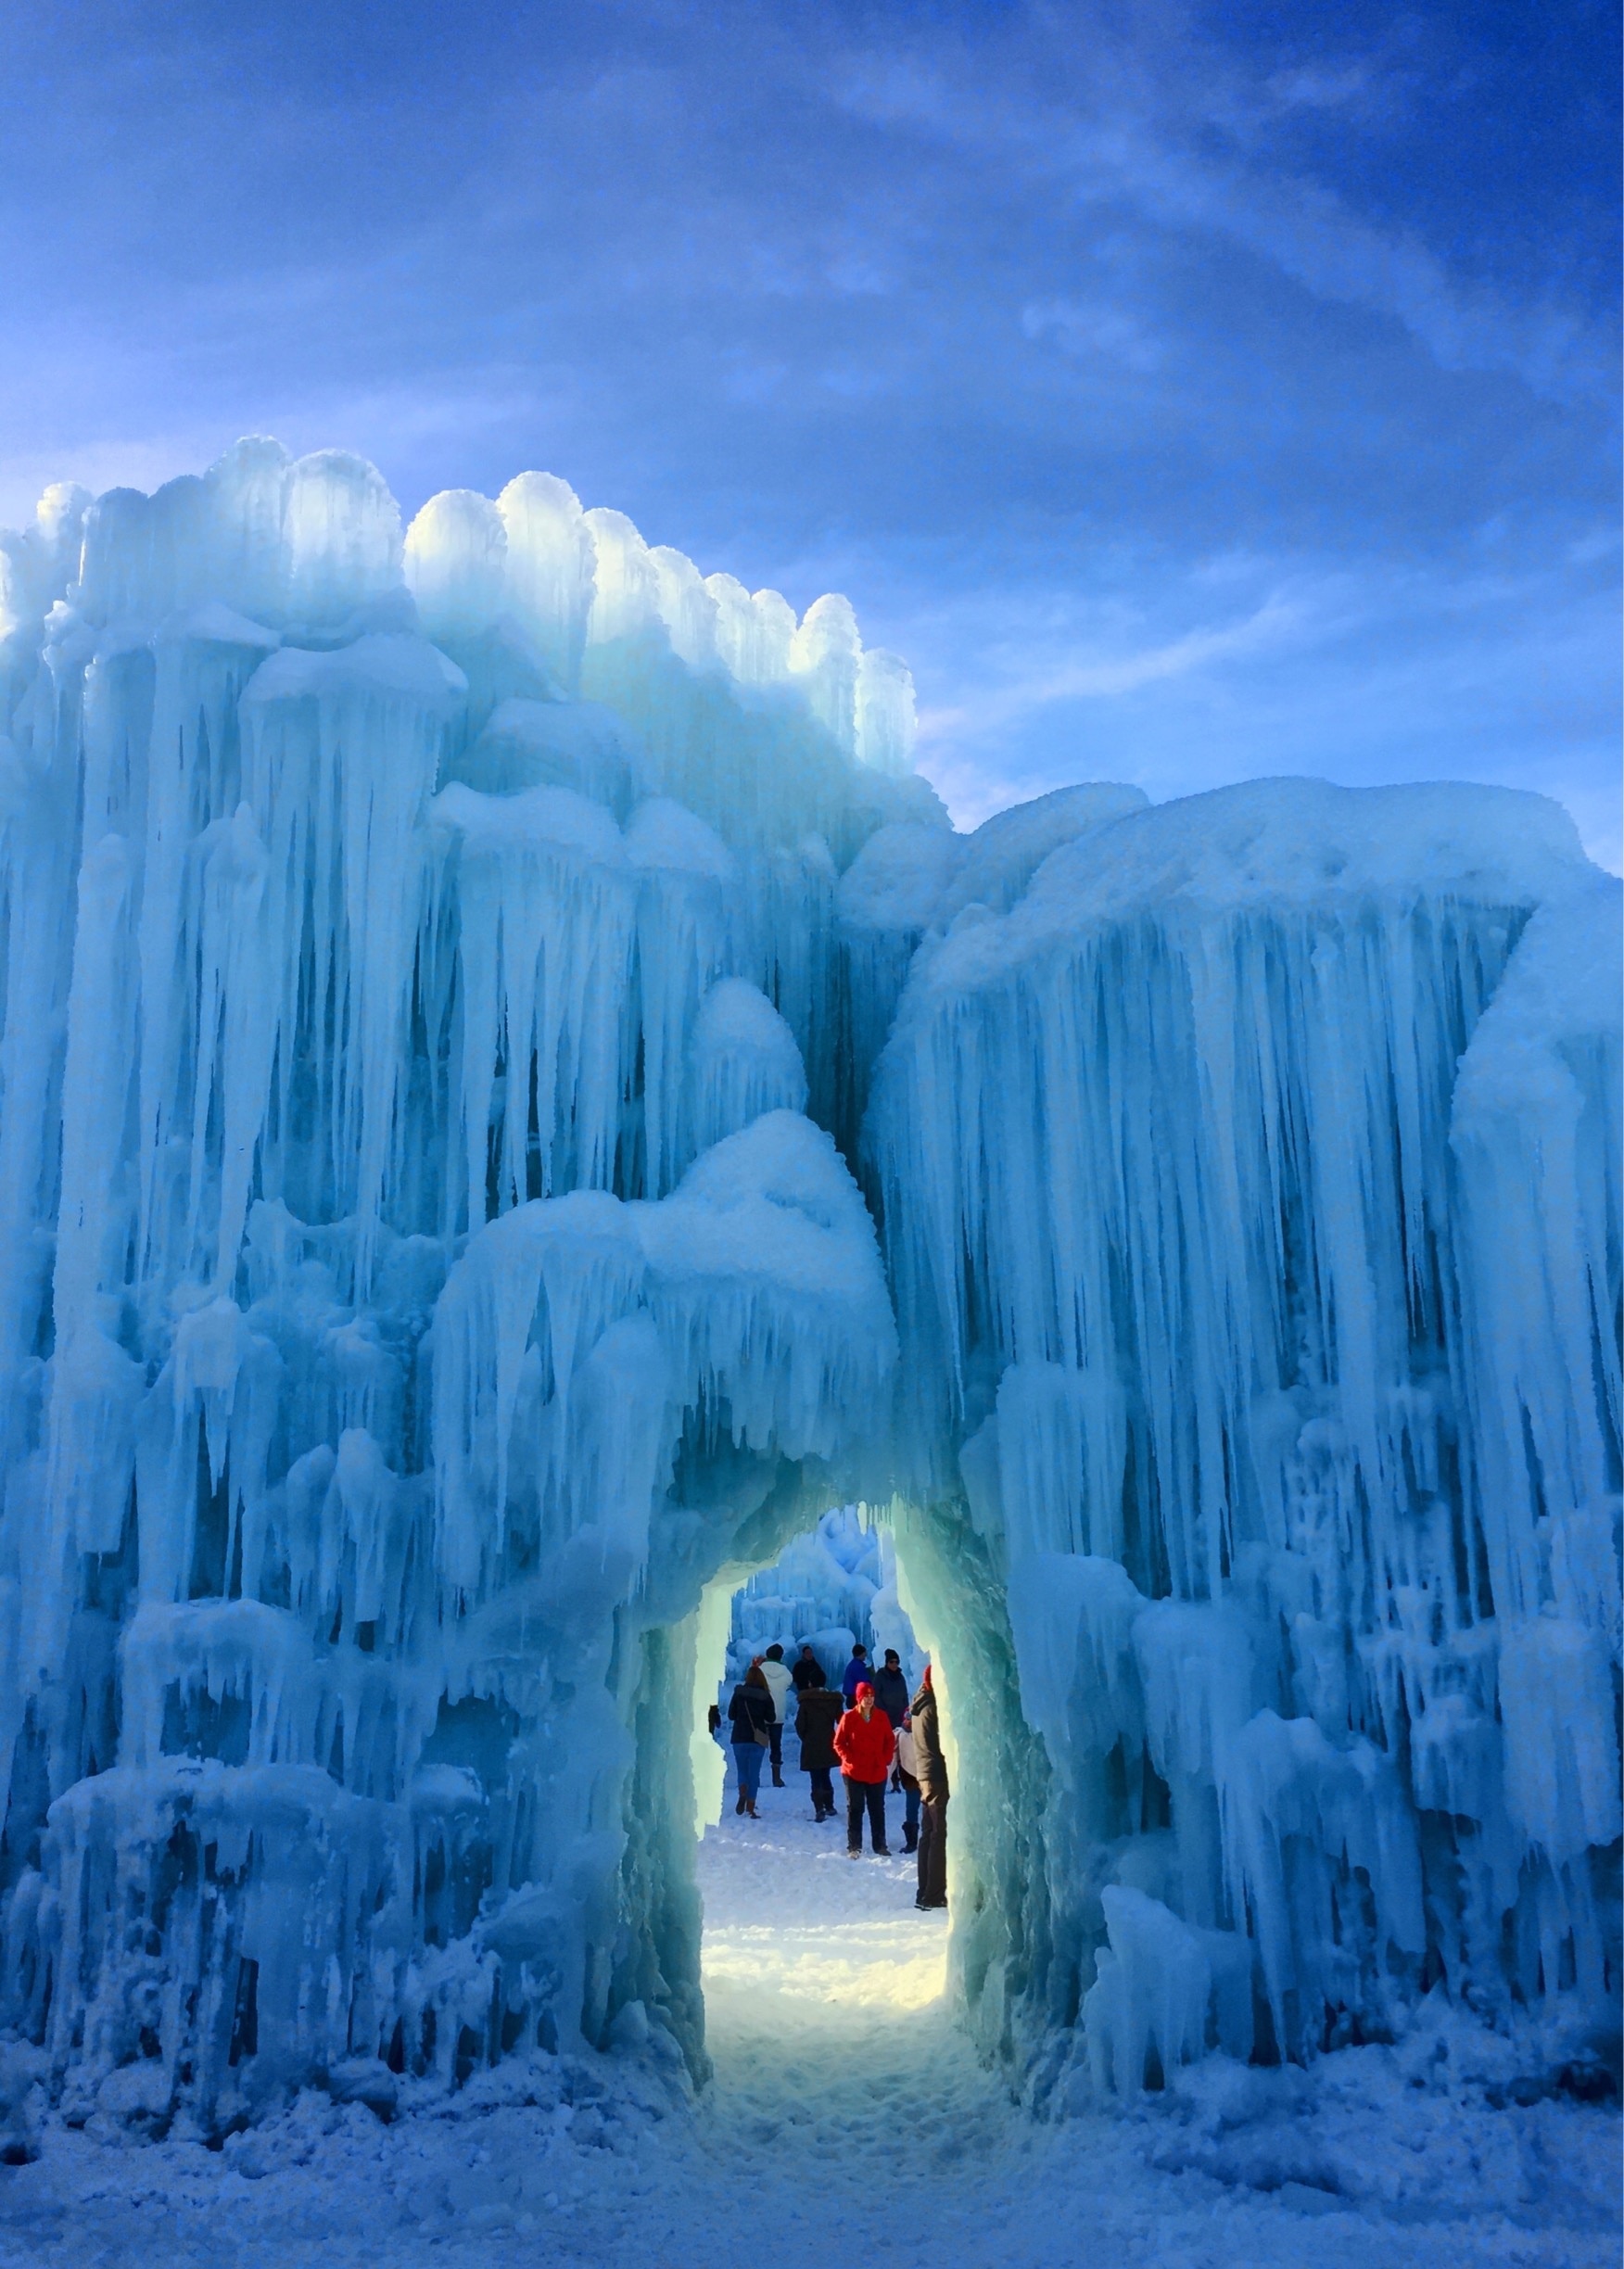 The Midway Ice Castles. Buy tickets online for a discount and dress warm. And if you want to avoid the crowds, go during the week. Great job this year. 